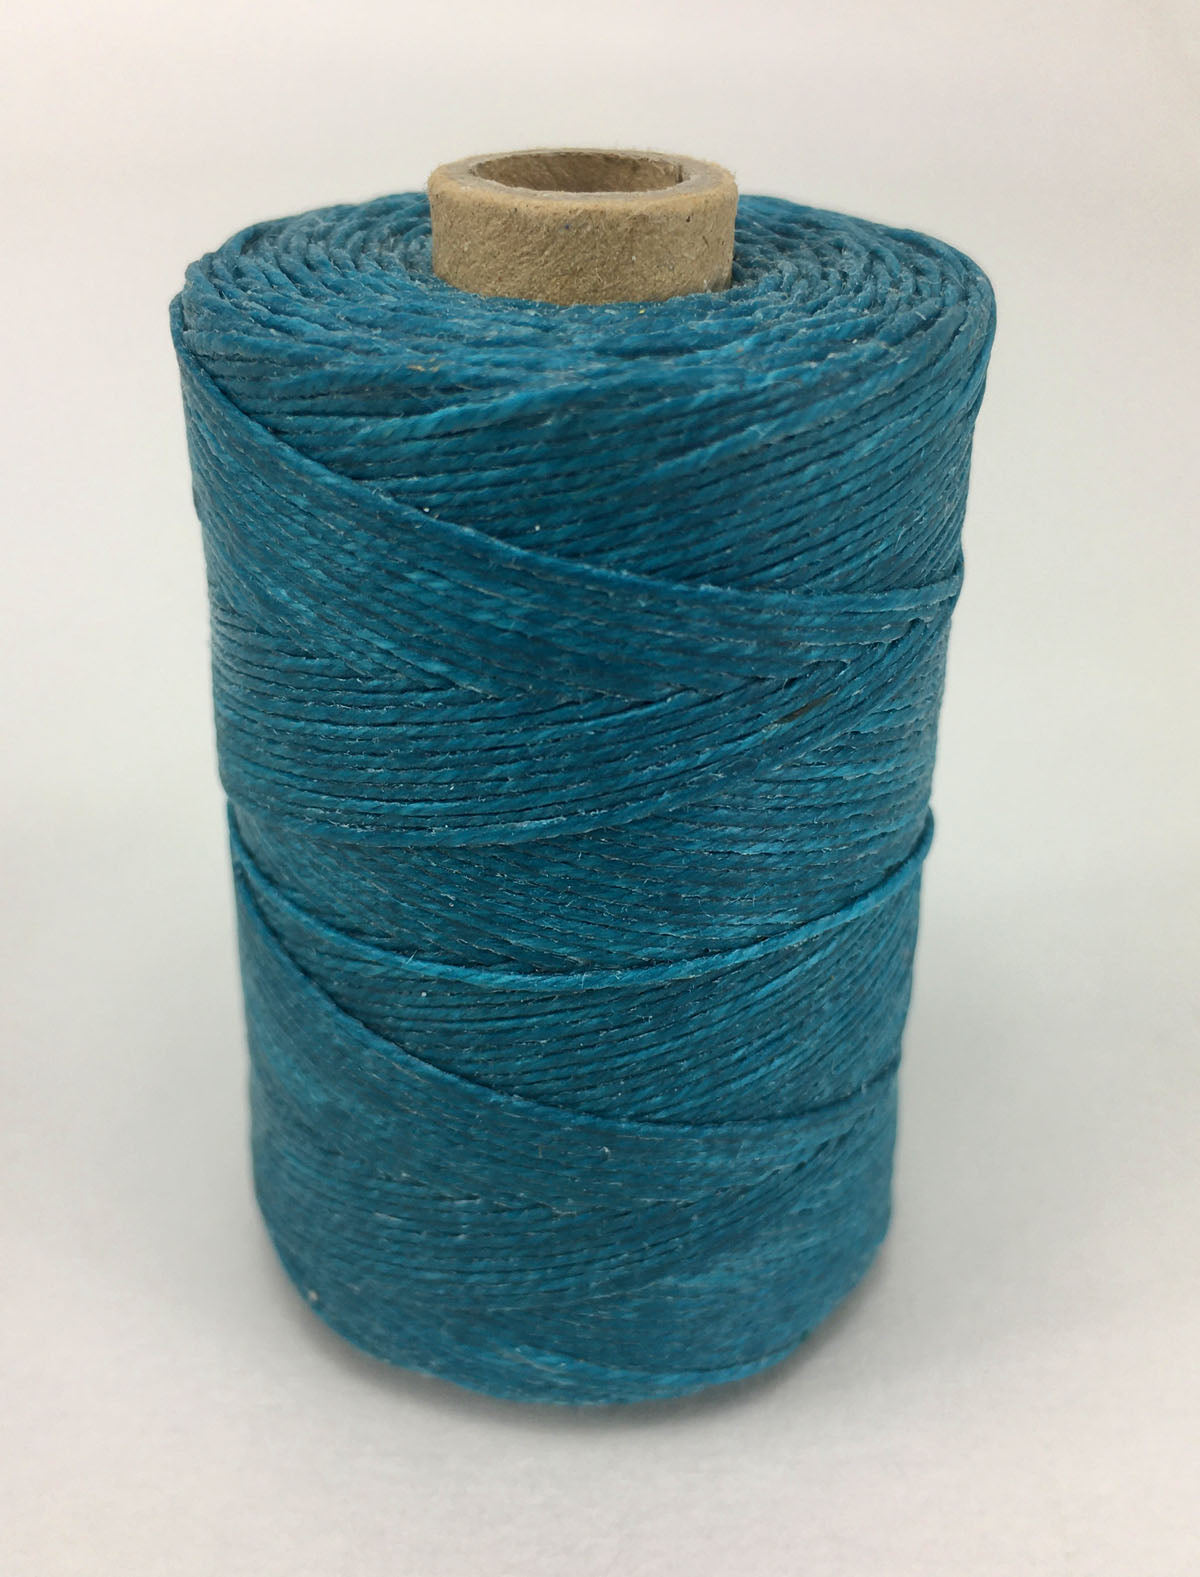 Cerulean Blue- Per spool 50g- 100% Pure Linen Thread- Waxed- 18/3 No.18 Cord 3- Approx 0.55mm  thick